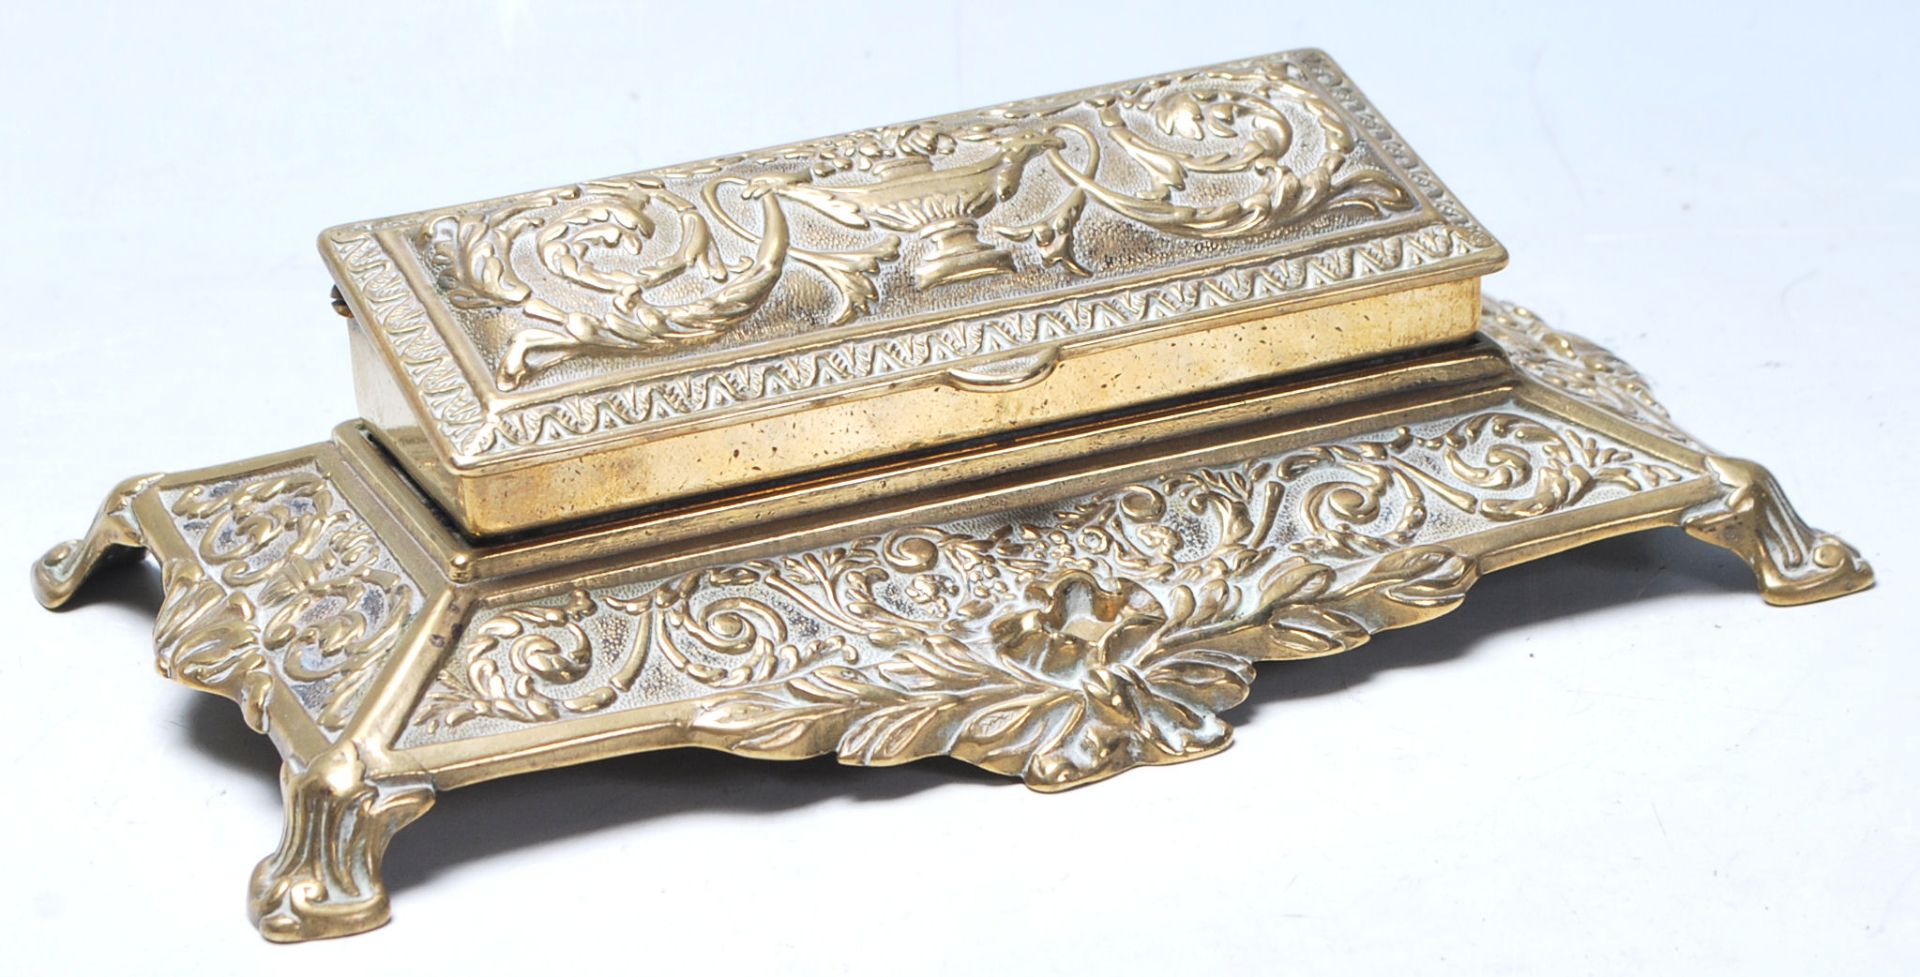 A late 19th century Victorian desk top brass inkwell